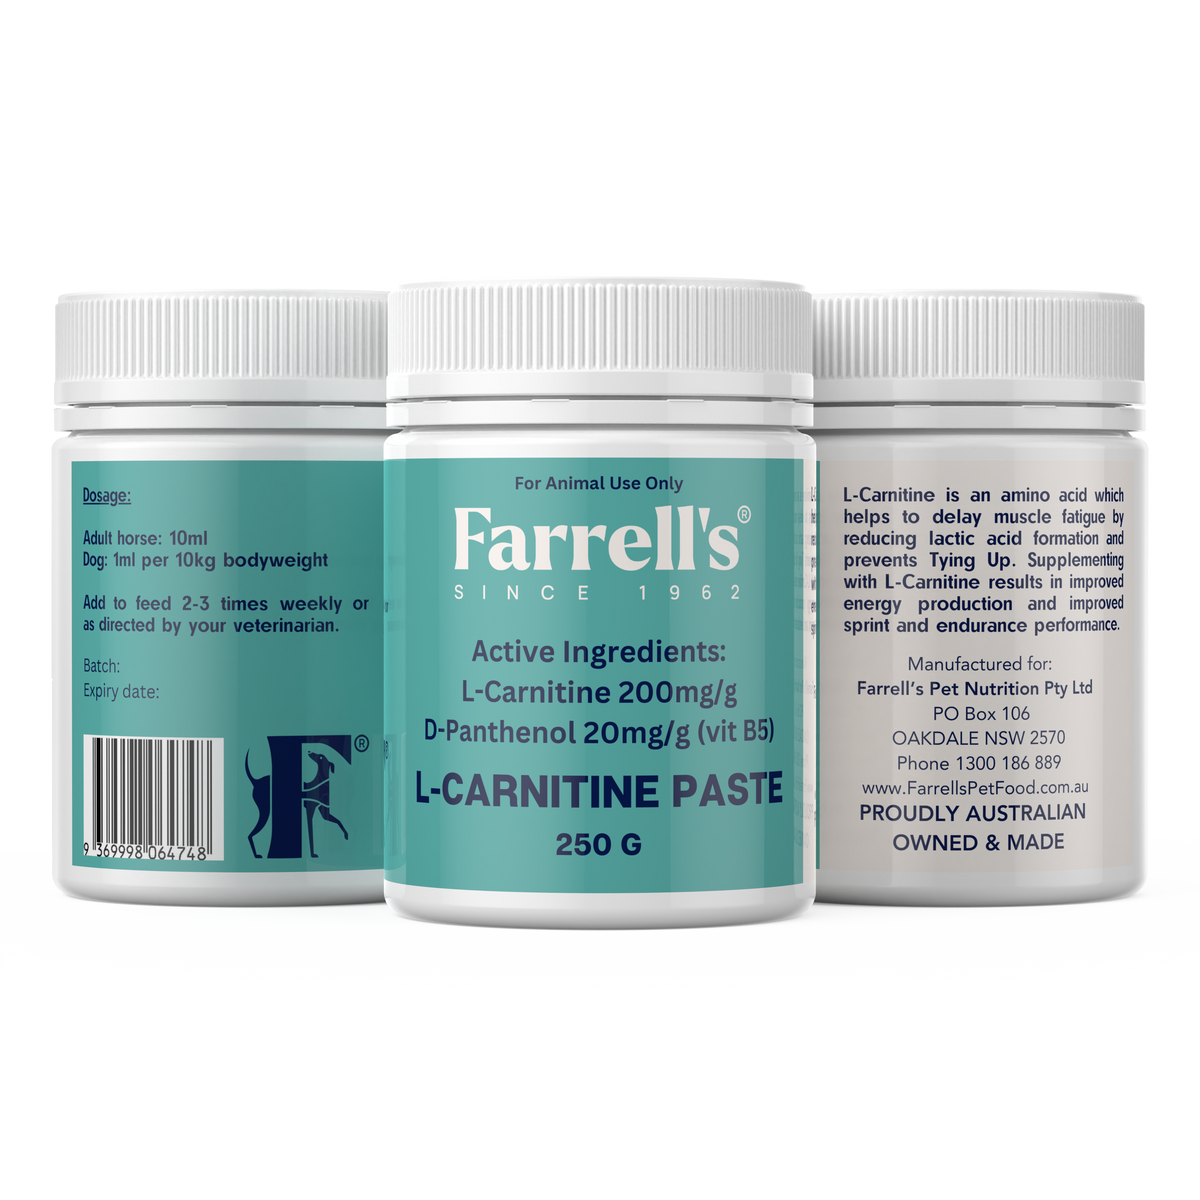 L-Carnitine Paste 250g Pack of 3